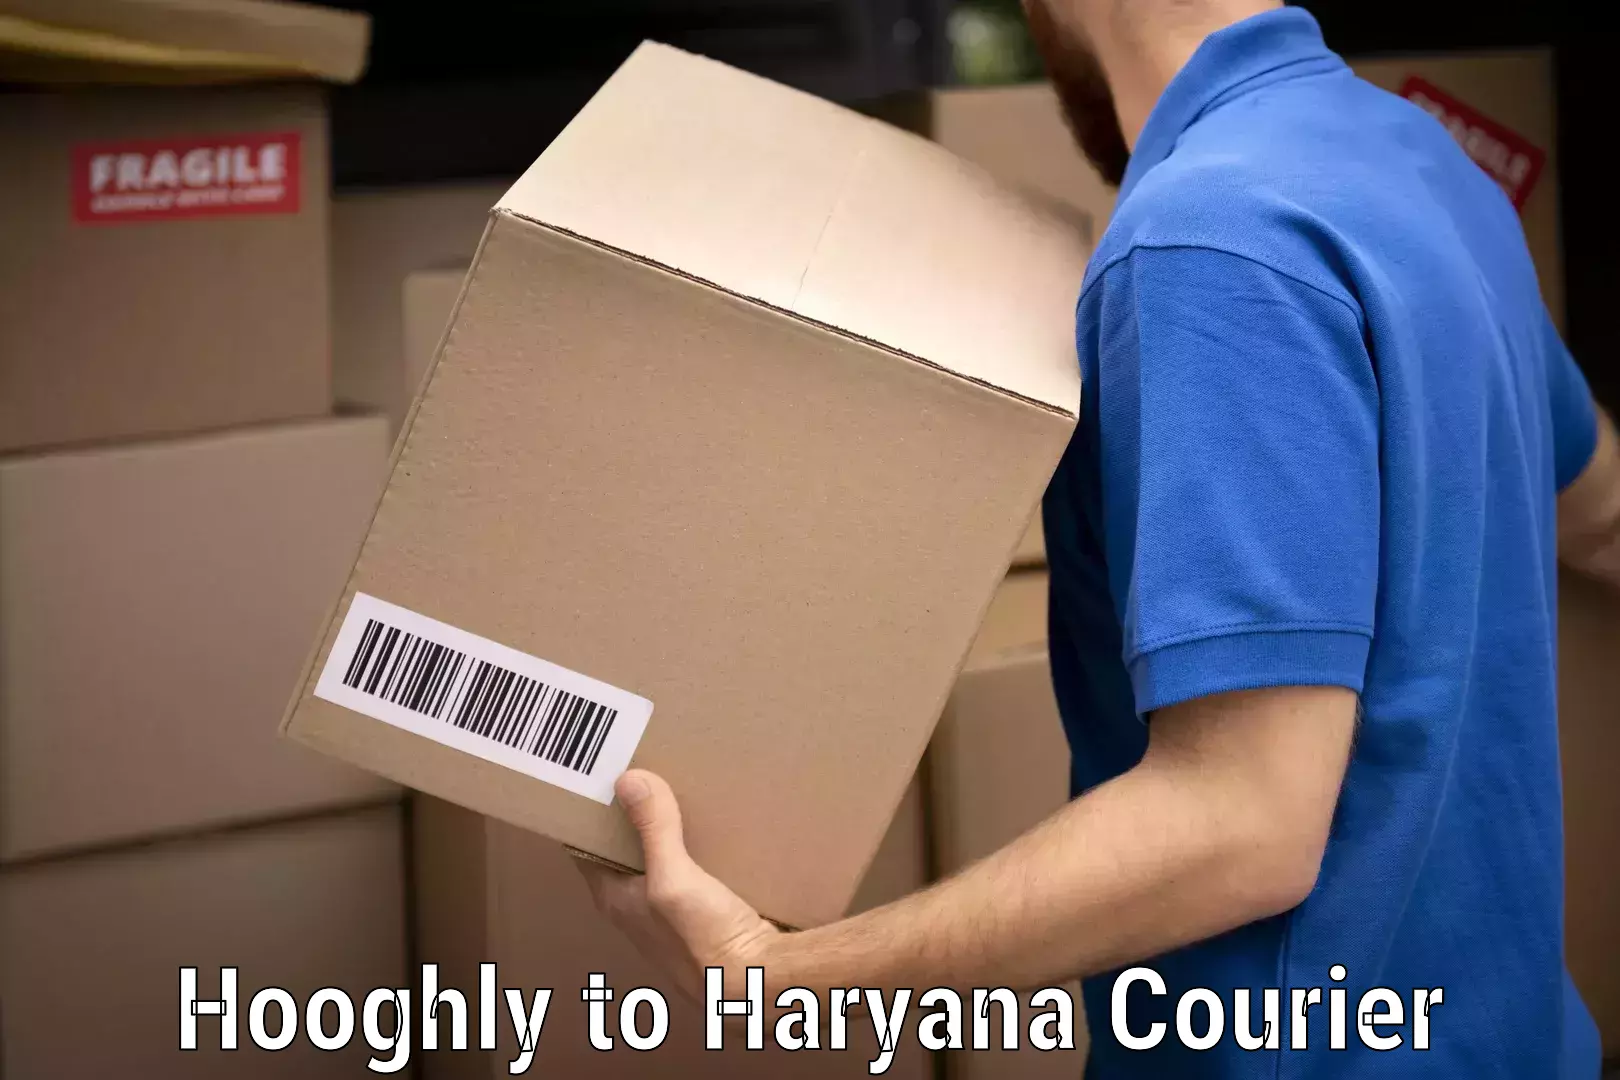 Furniture transport service Hooghly to Haryana